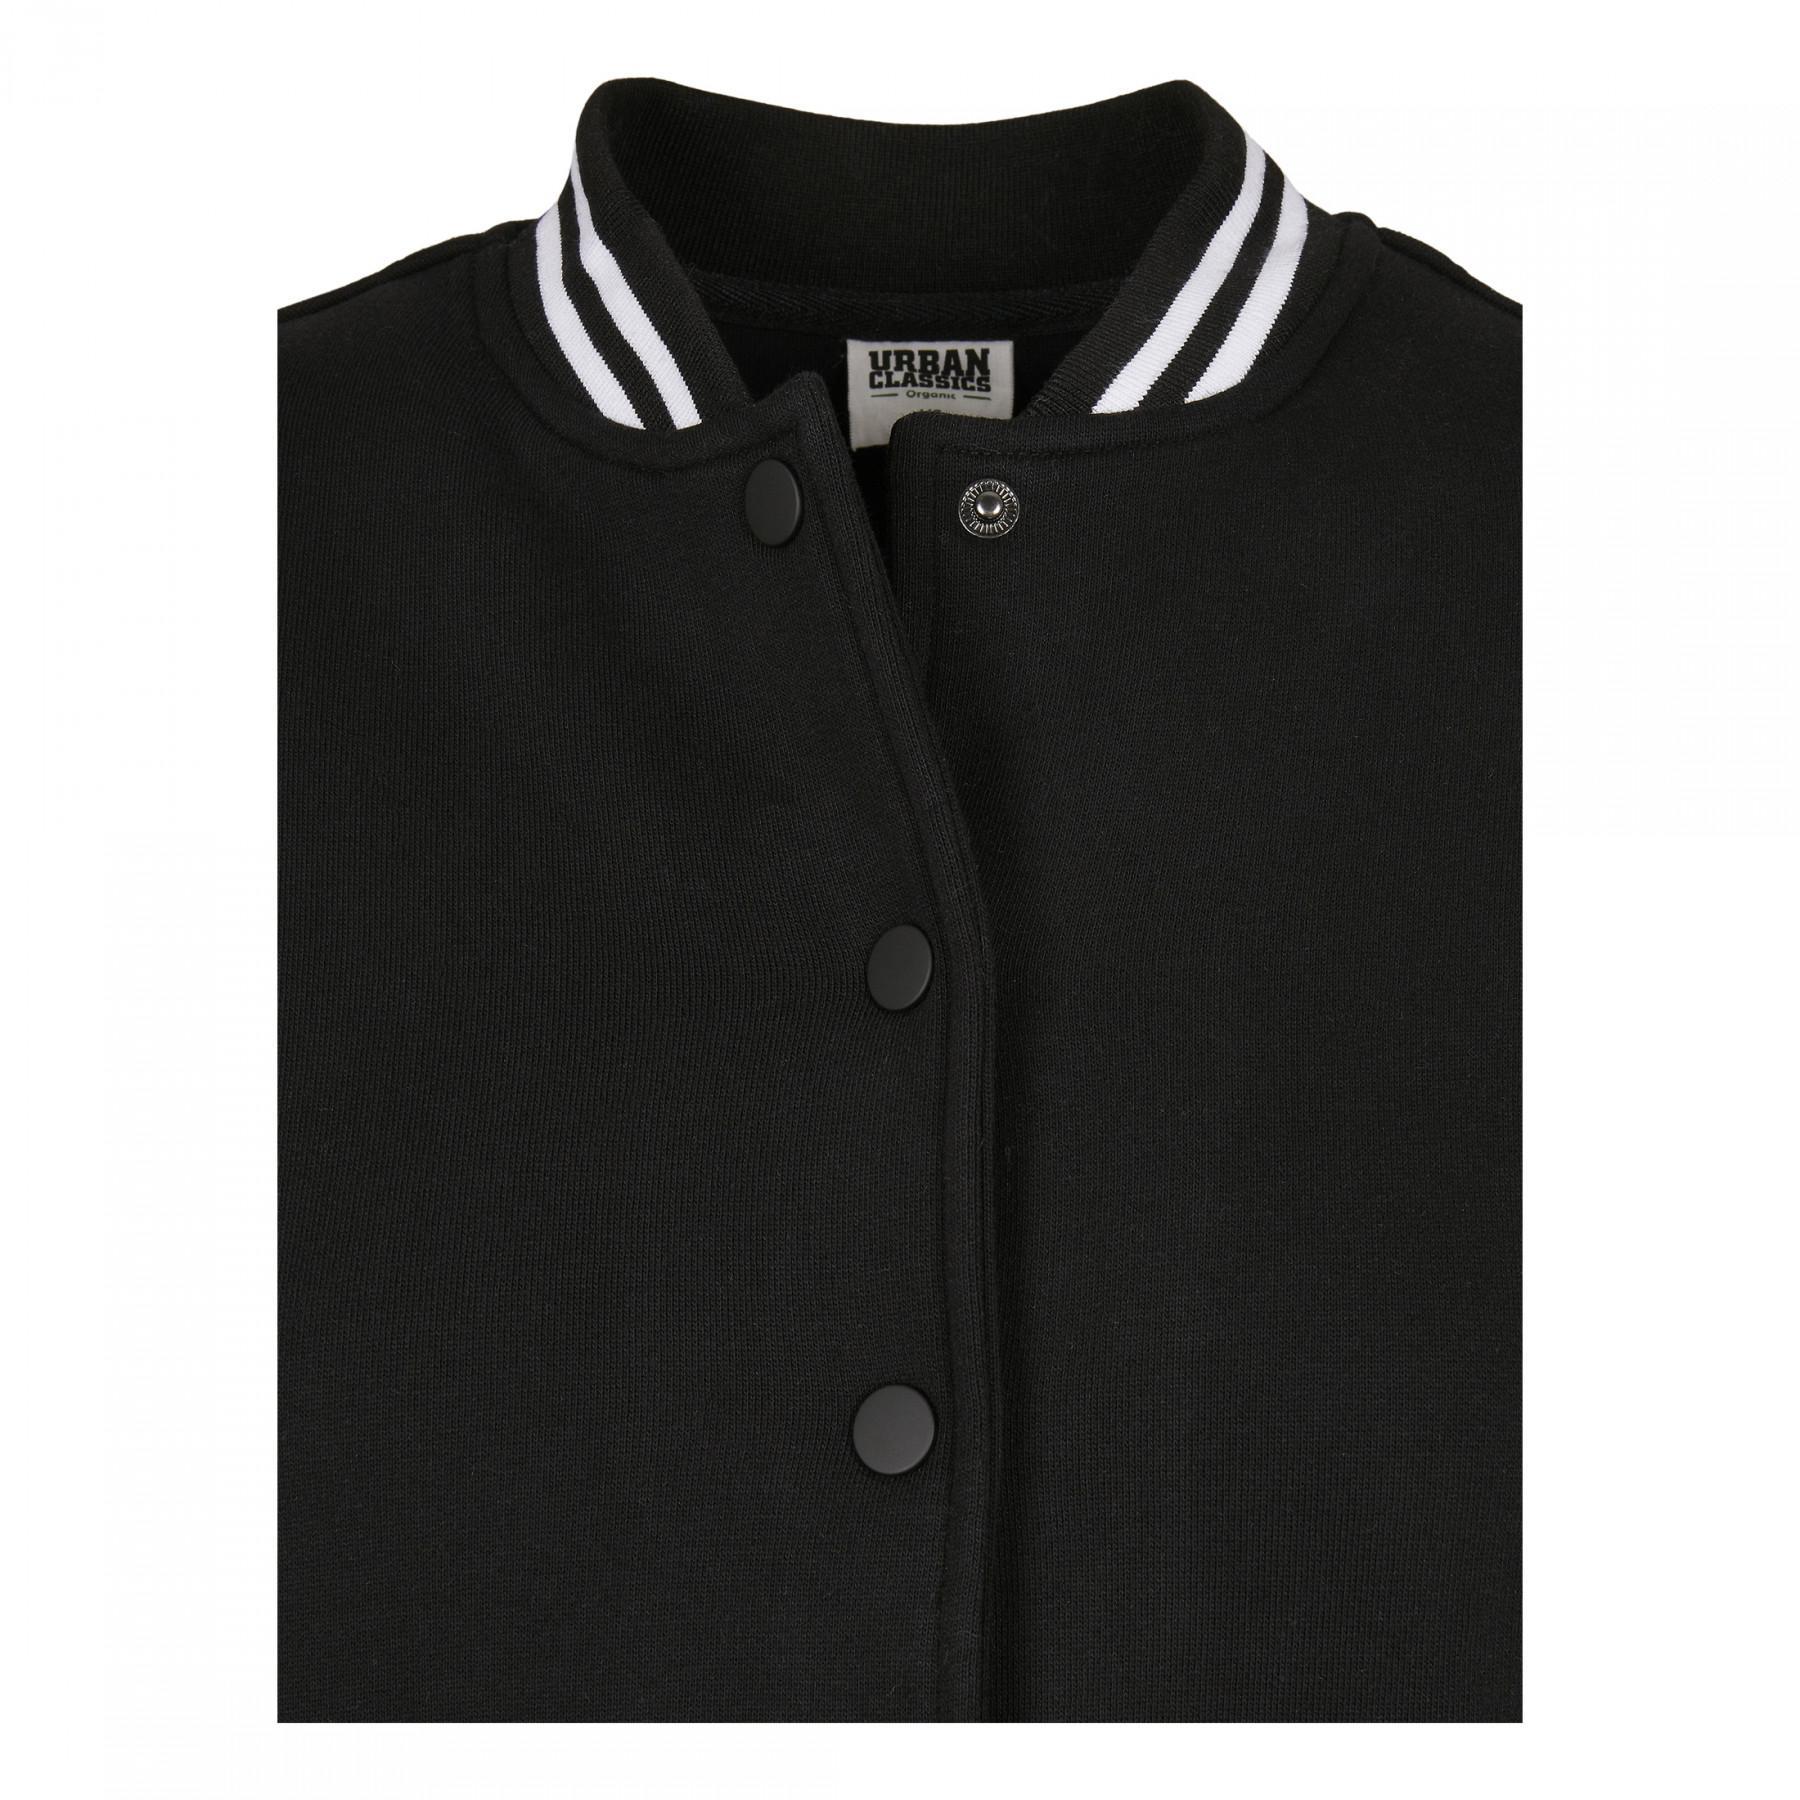 Veste Teddy collège femme sustainable Urban Classics recyclable